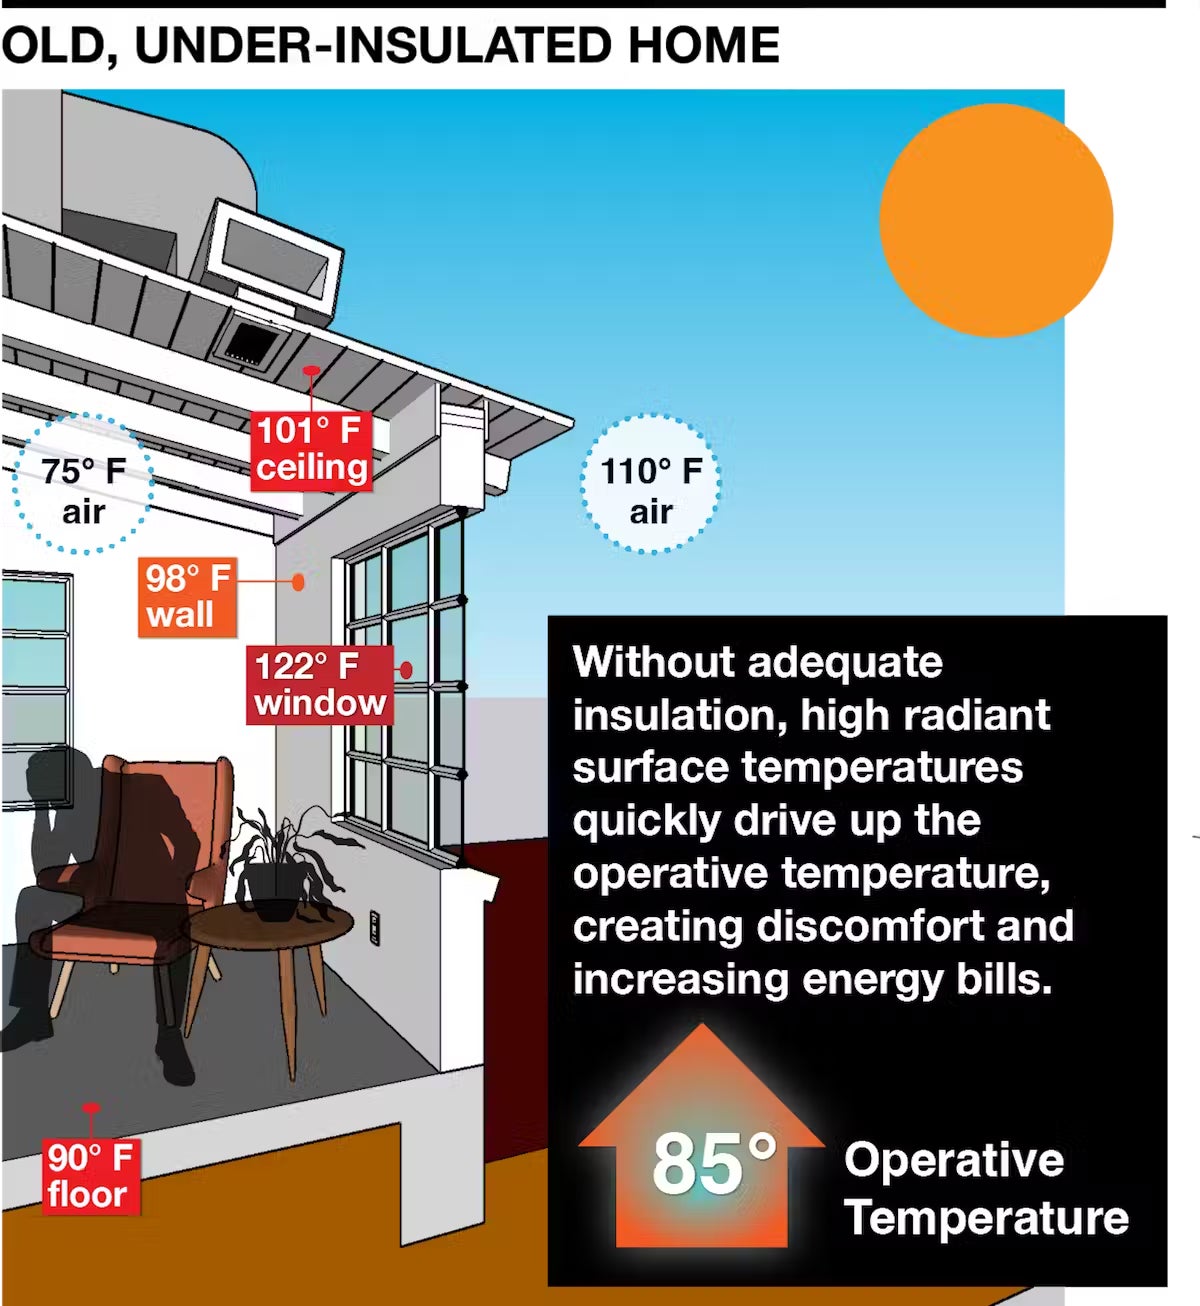 Graphic of the high radiant mean temperature in old, under-insulated homes